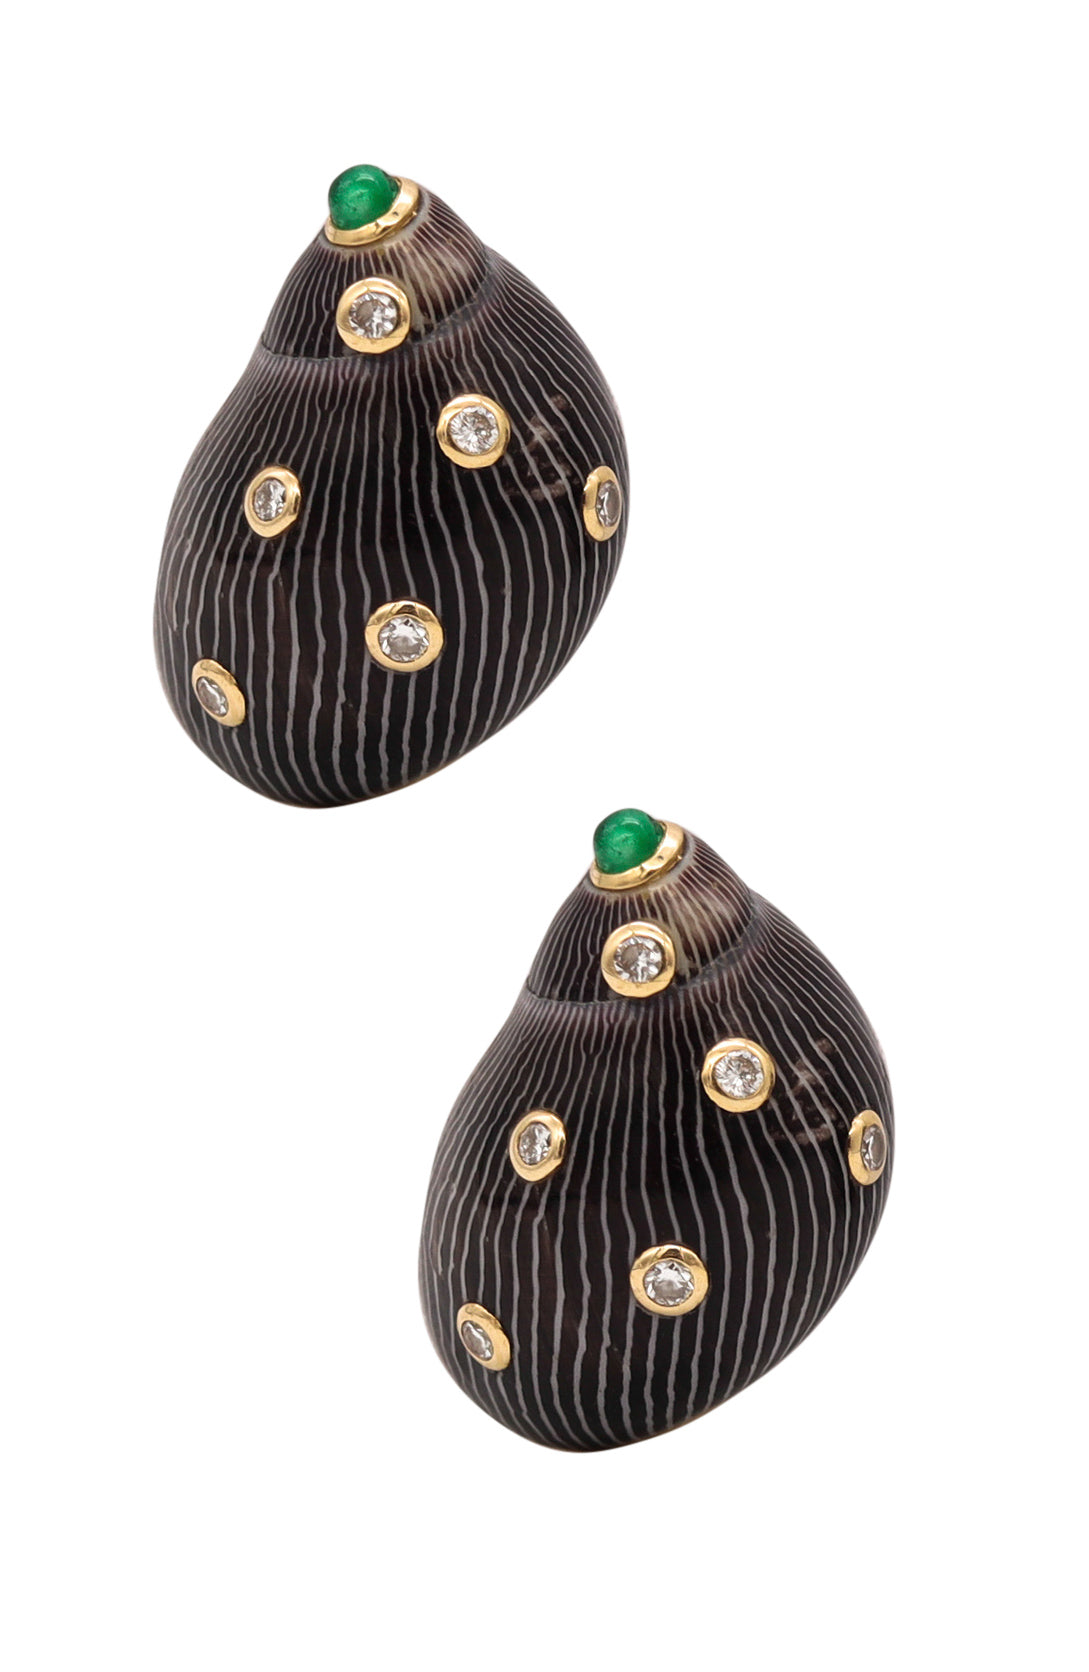 *Trianon Seaman Schepps Colorful Gray shells earrings in 14 kt gold with Emerald and Diamonds